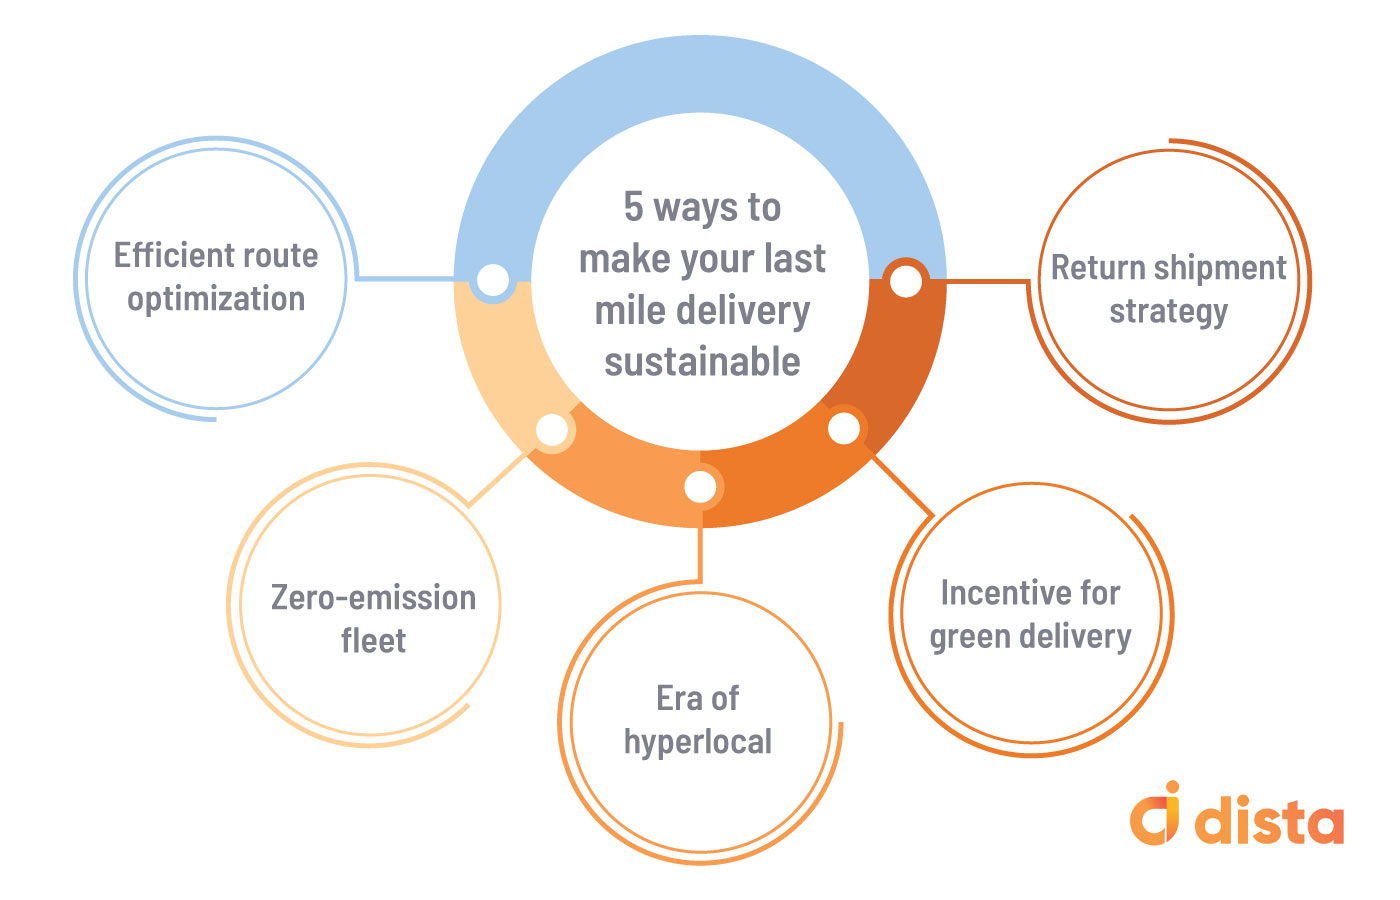 5 ways to make your last mile delivery sustainable